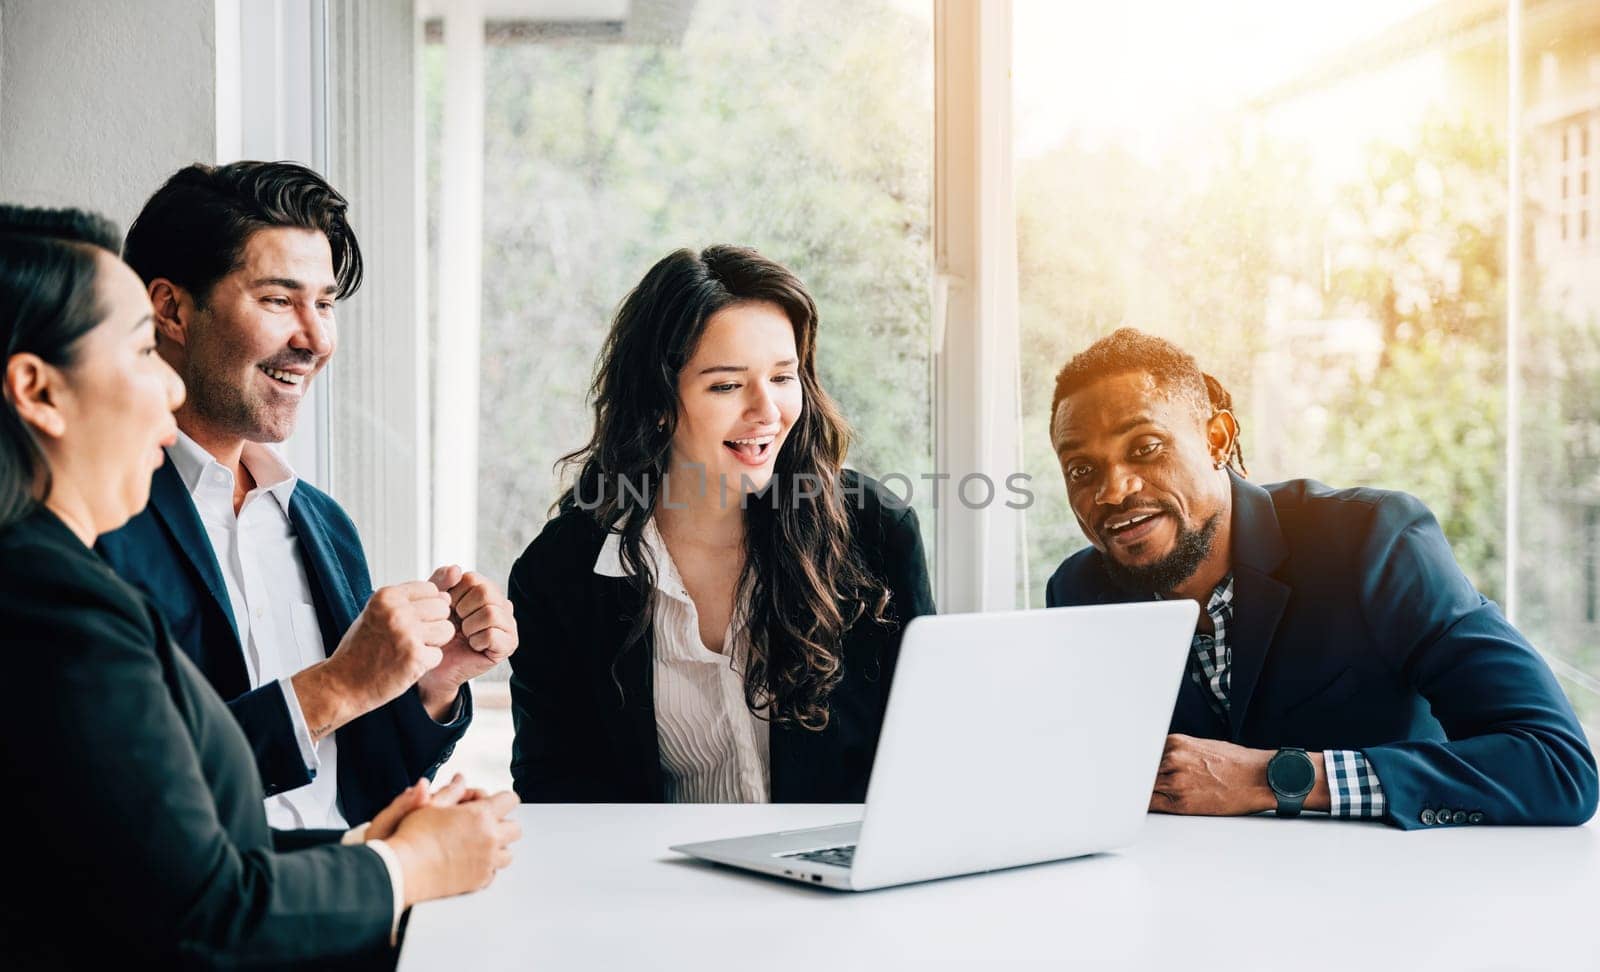 Diverse colleagues, both men and women, collaborate in a meeting room using a laptop. Their teamwork, diversity, and cooperation are palpable as they discuss, plan, and strategize for success. by Sorapop